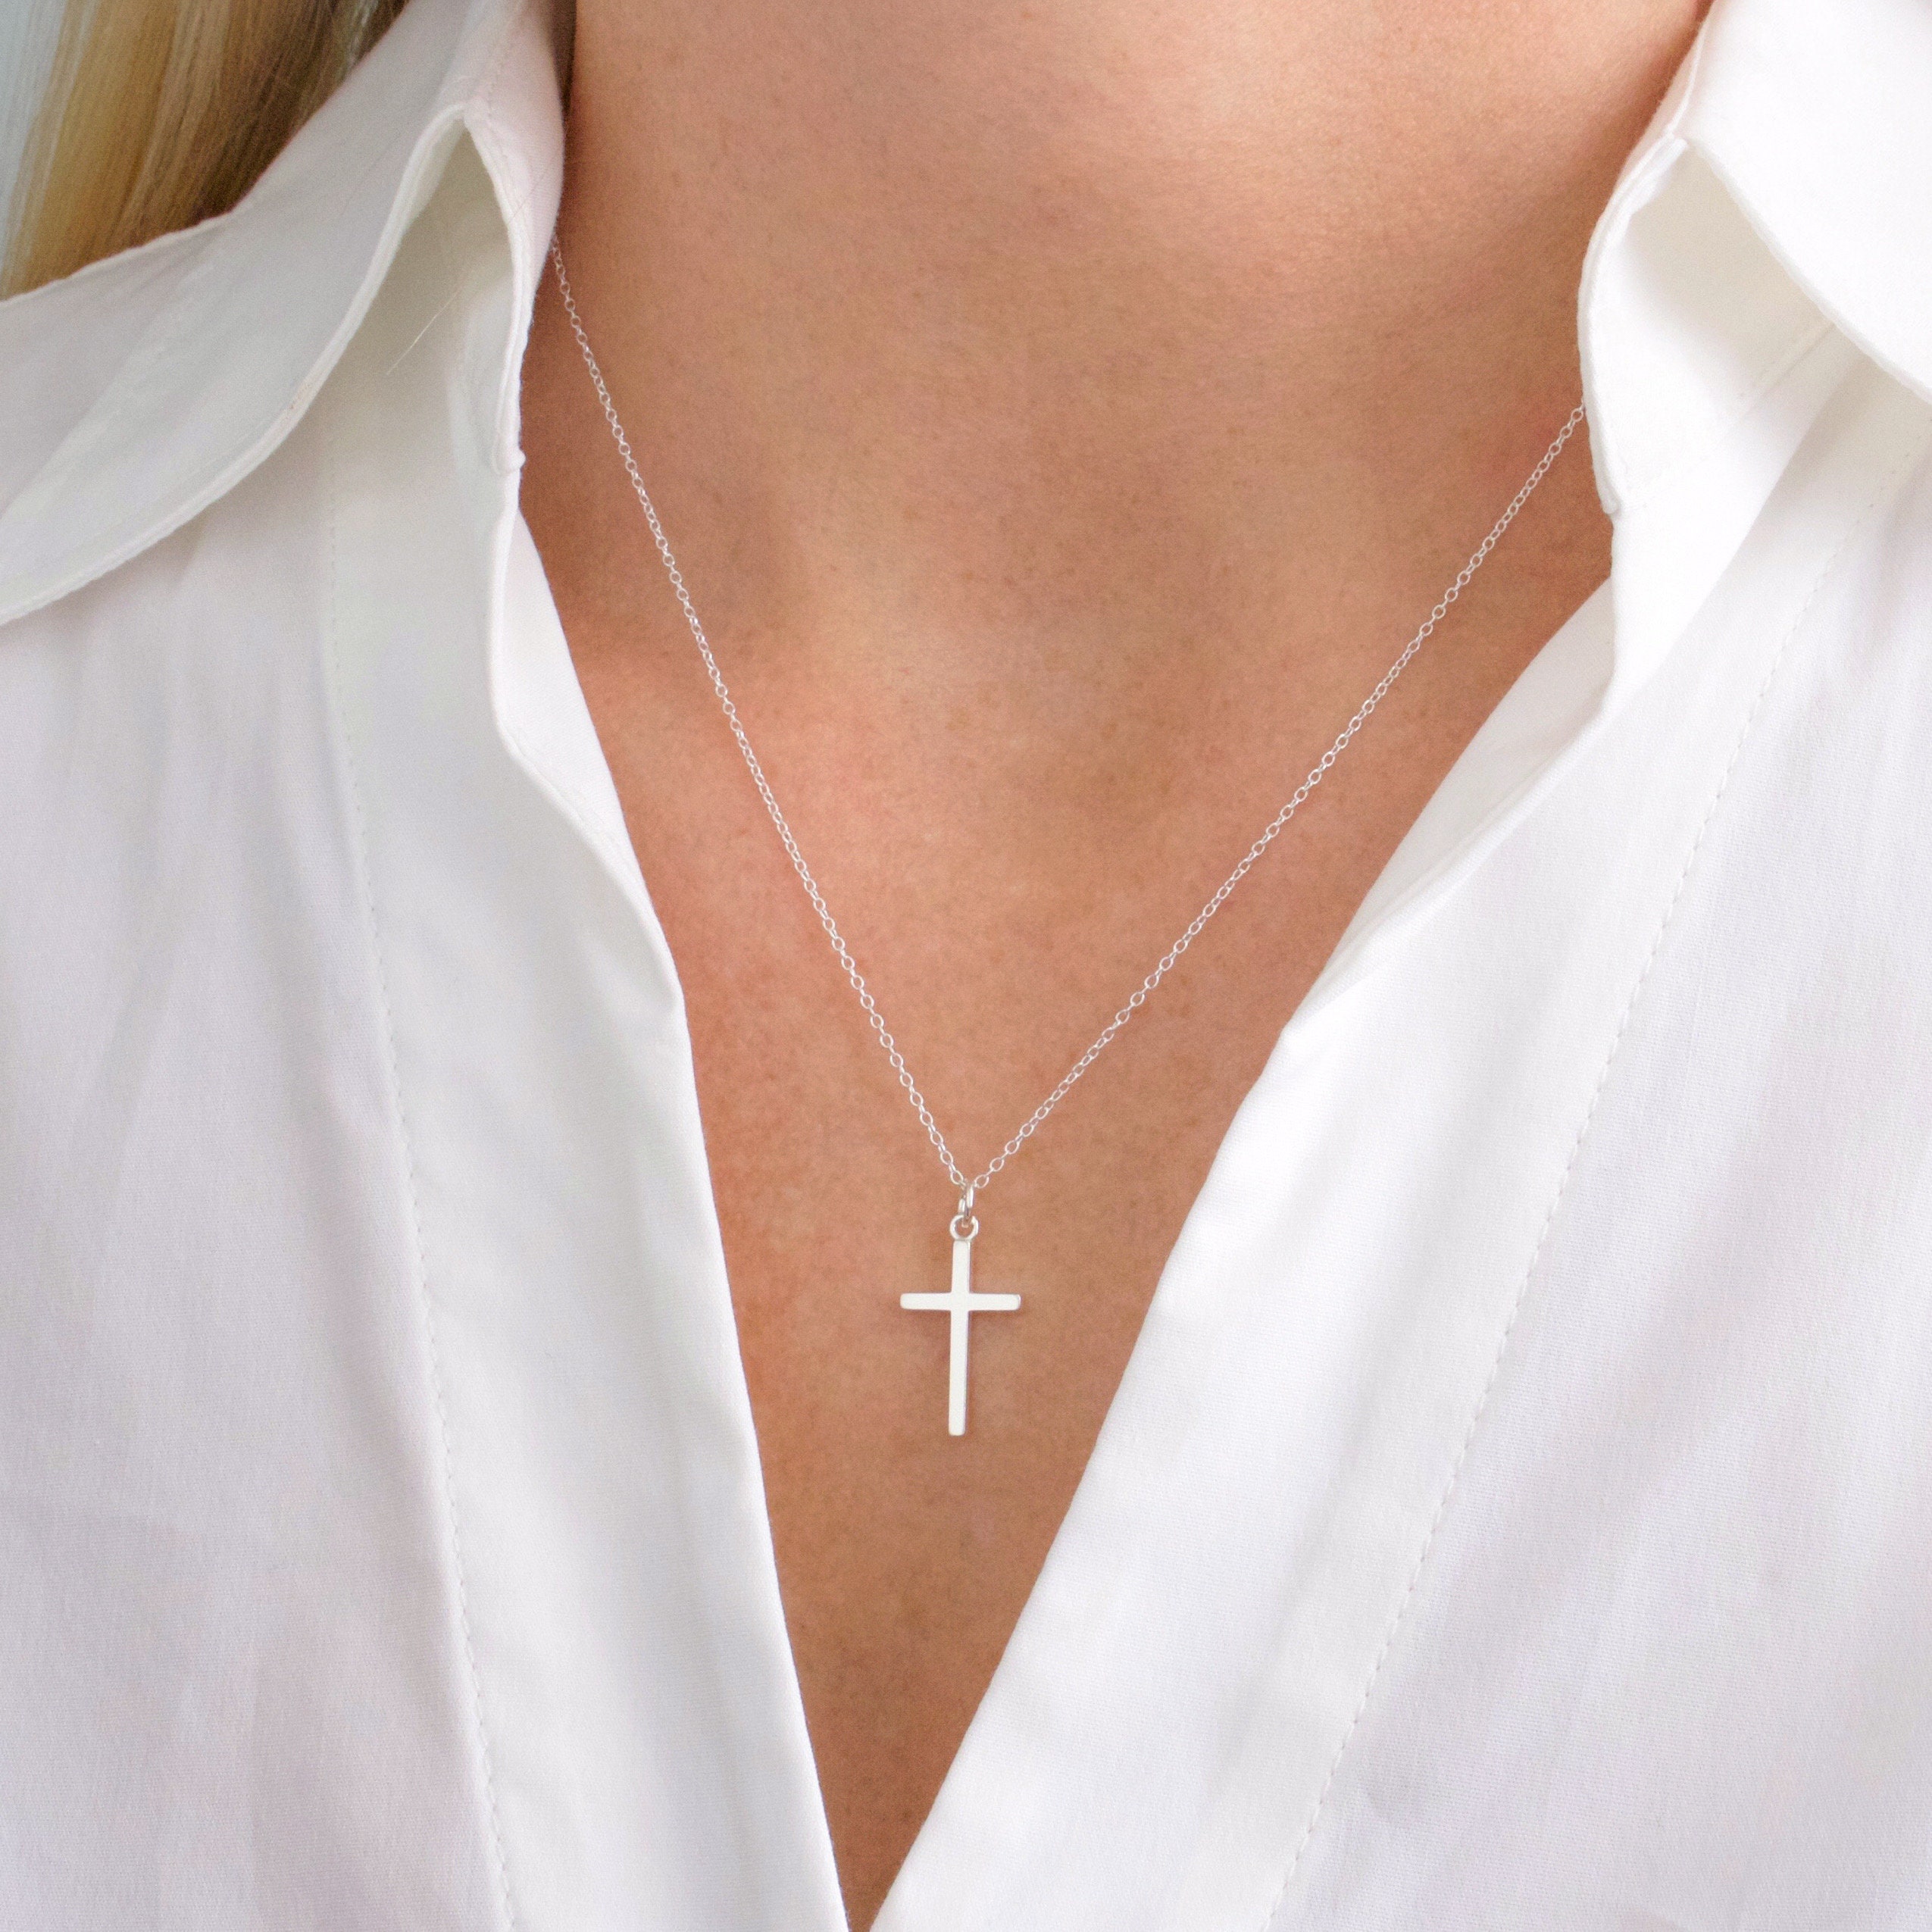 Personalized Silver Cross Necklace With Birthstone For Women – BIRTHSTONES  JEWELRY INC